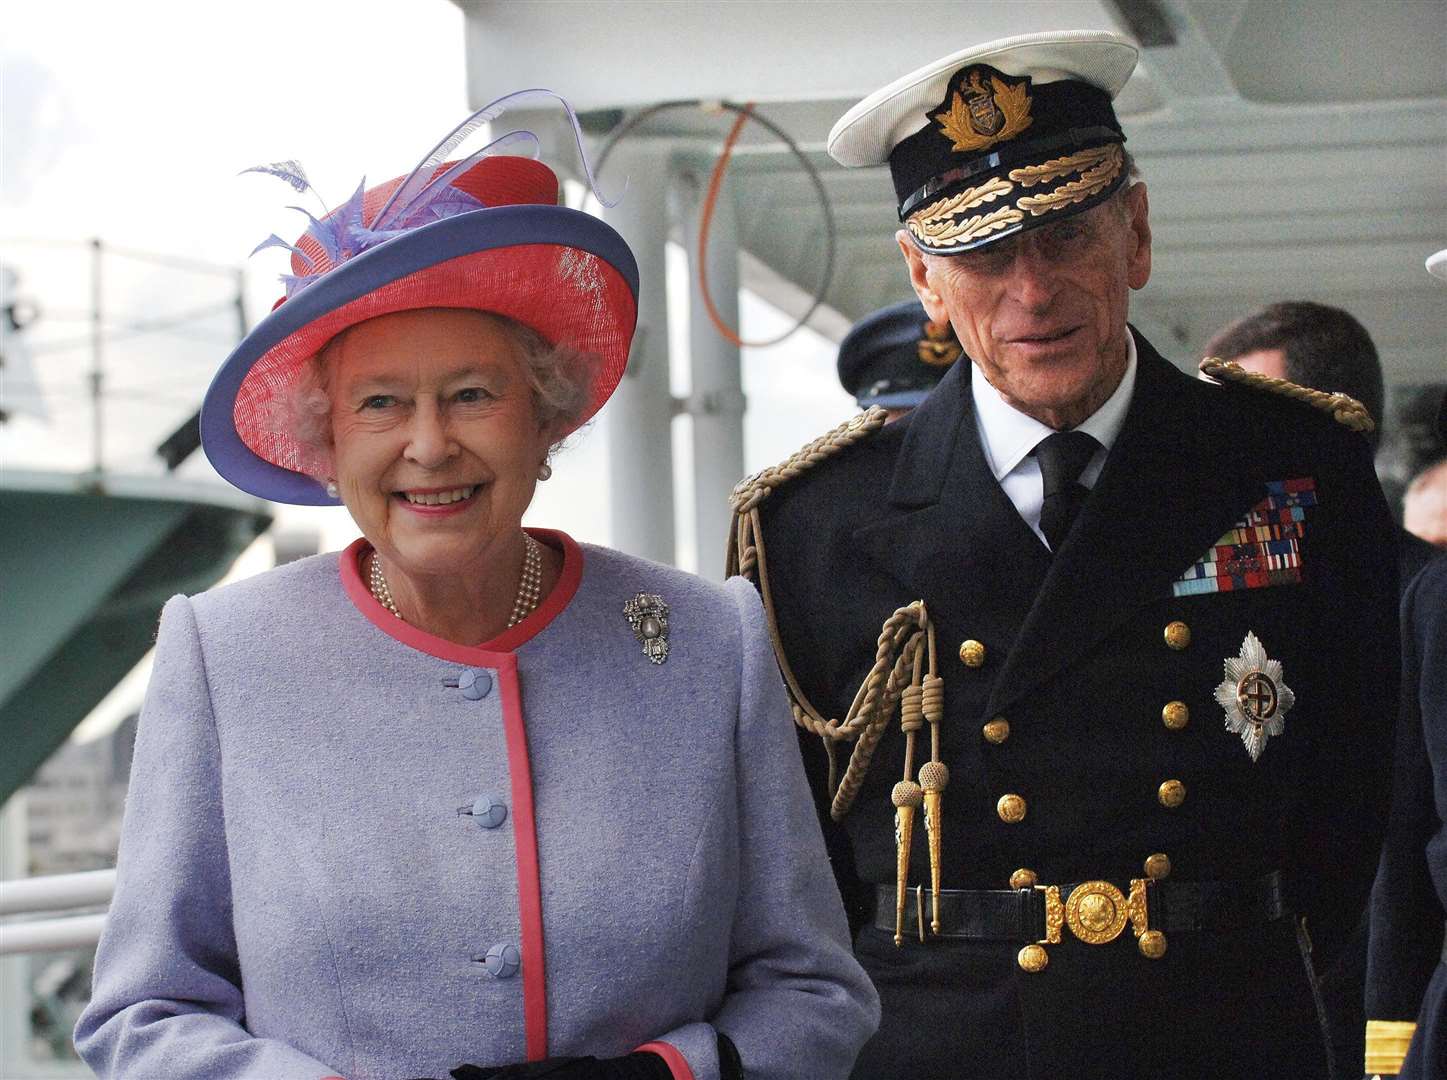 The duke, in his Naval uniform, with the Queen (PA)